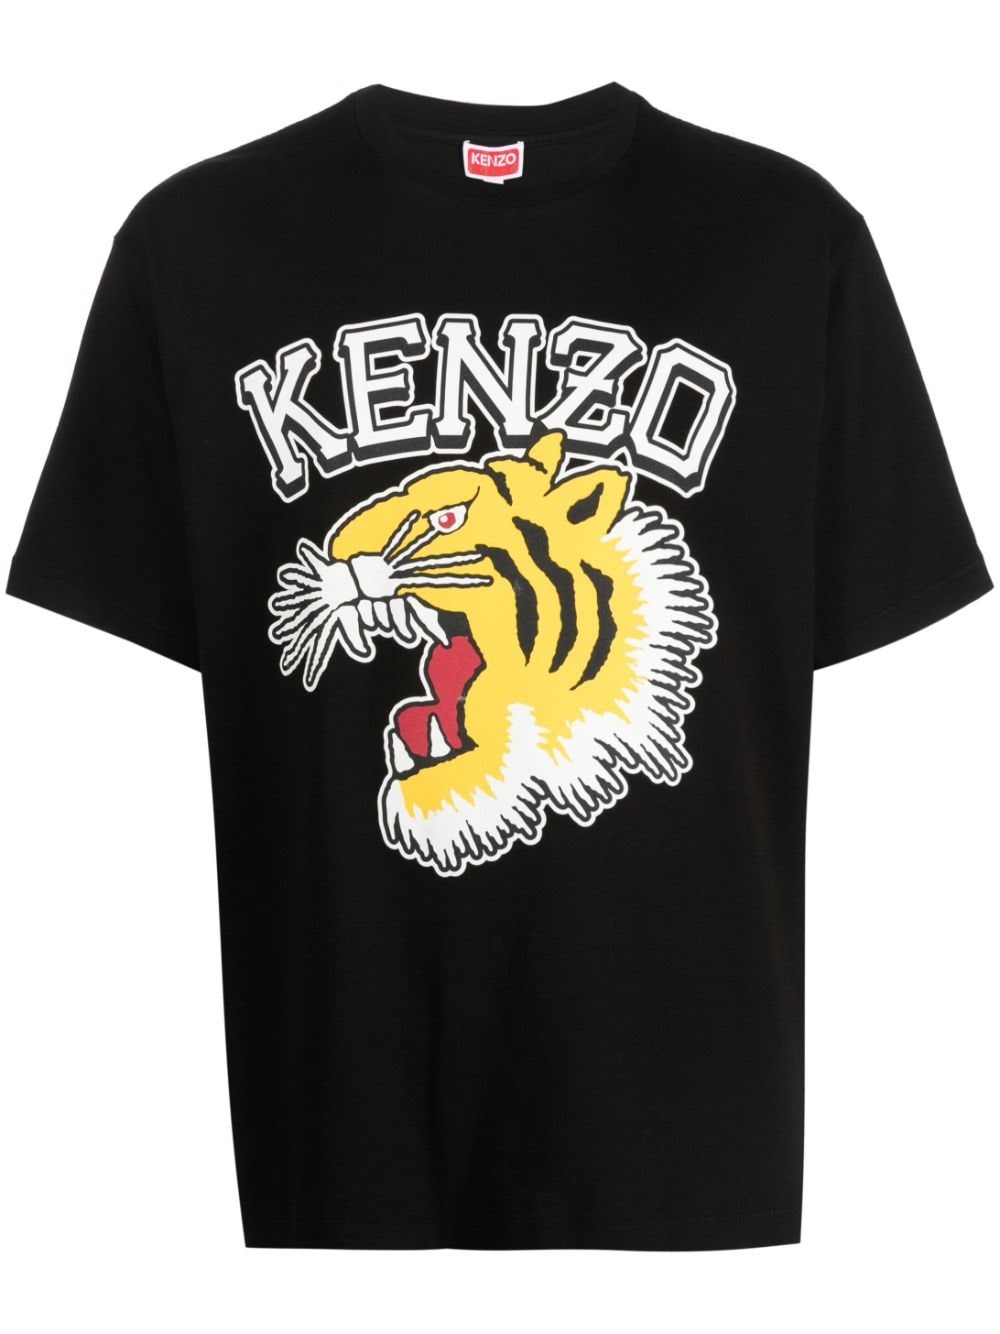 kenzo T-SHIRT available on montiboutique.com - 55345